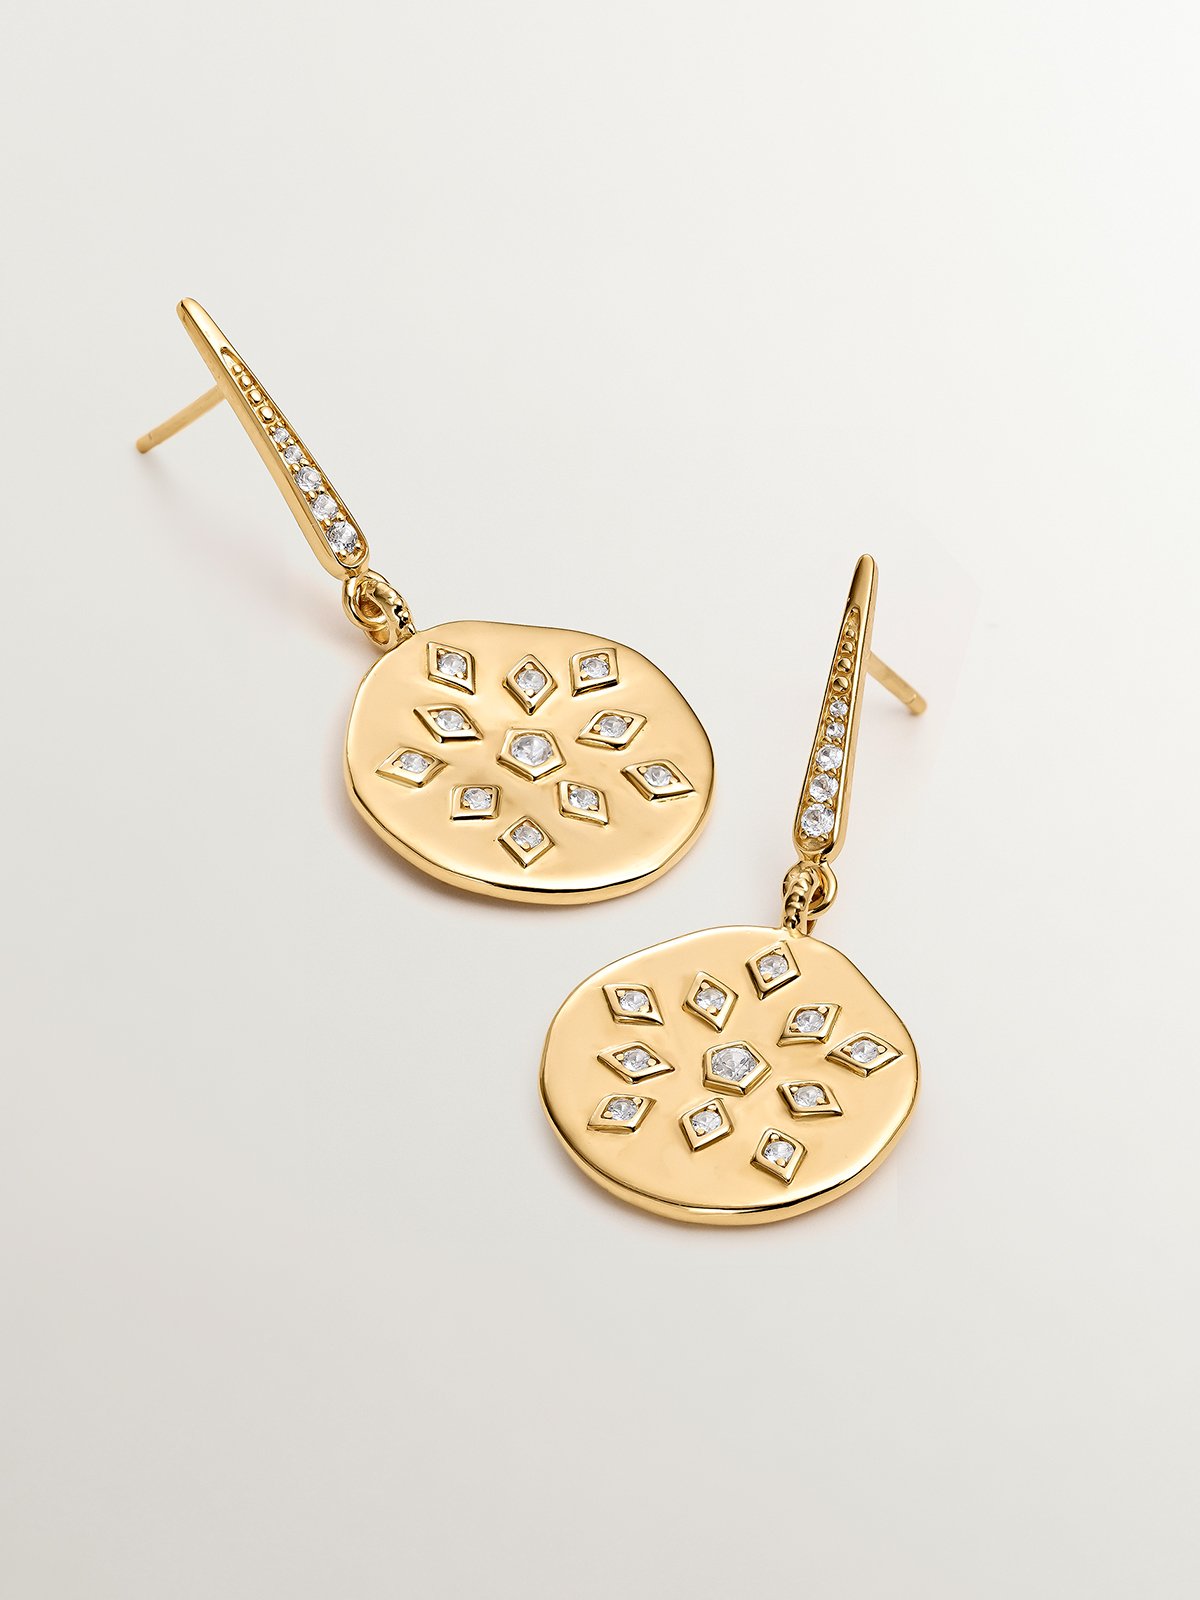 925 silver earrings bathed in 18K yellow gold with an irregular medal shape and white topaz.